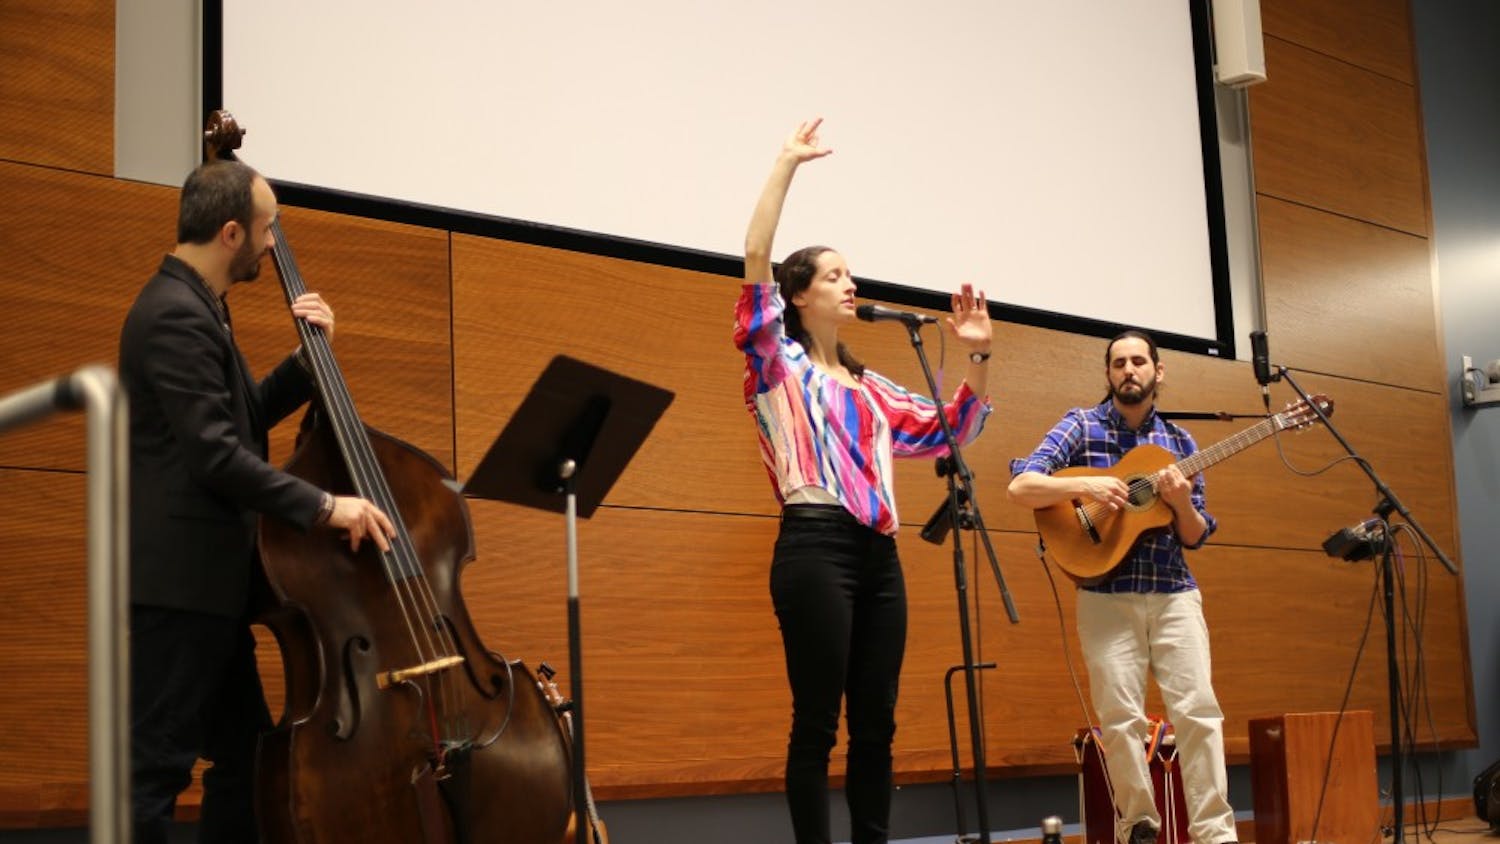 KelsiCote, a Chilean folk jazz group, performs music March 4 at the School of Global and International Studies.&nbsp;